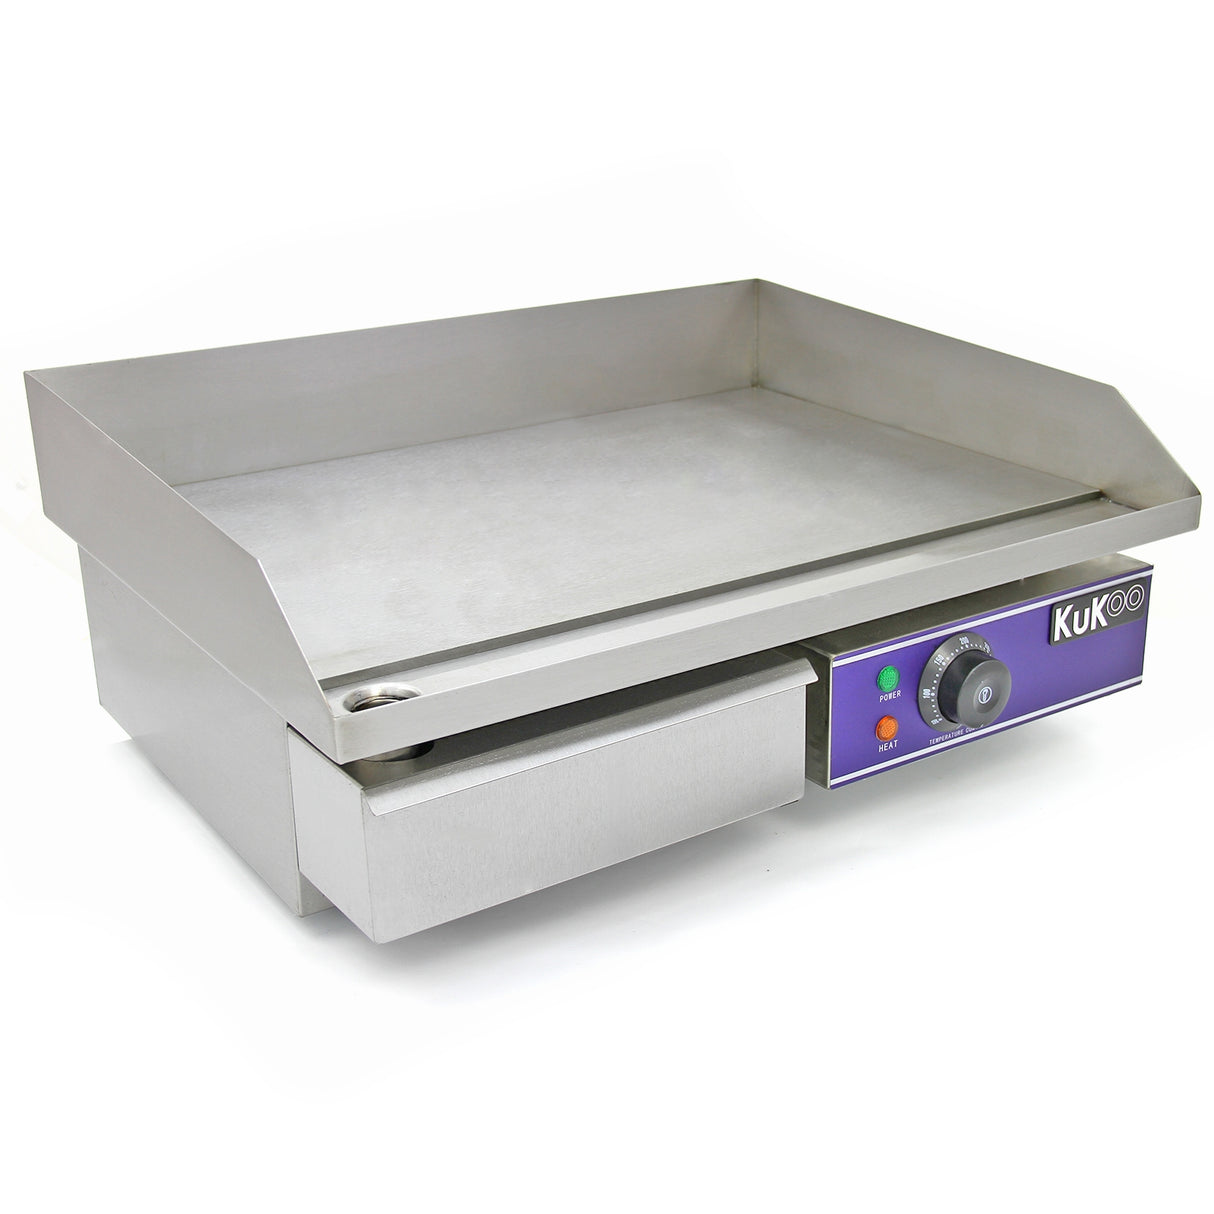 KuKoo 50cm Wide Electric Griddle